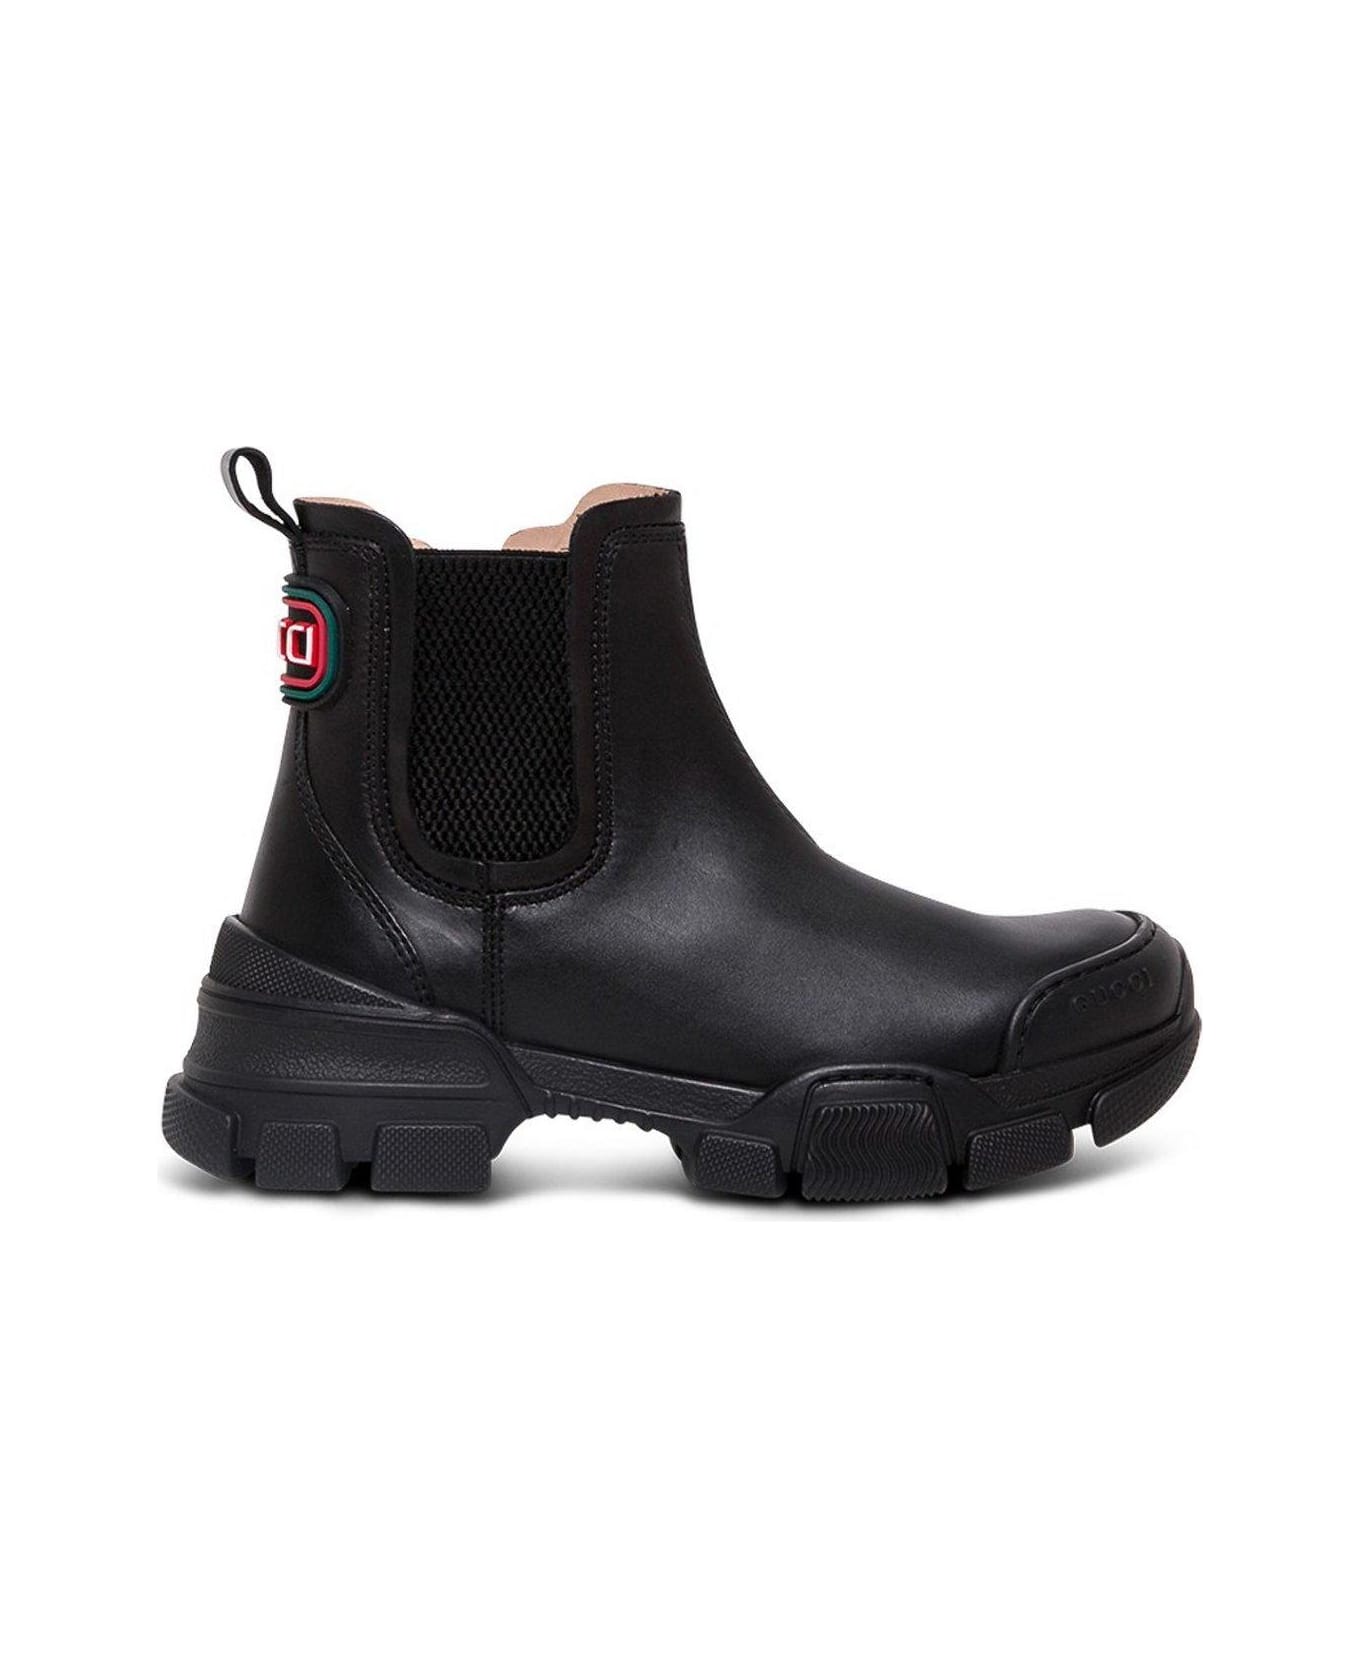 Gucci Logo Patched Boots